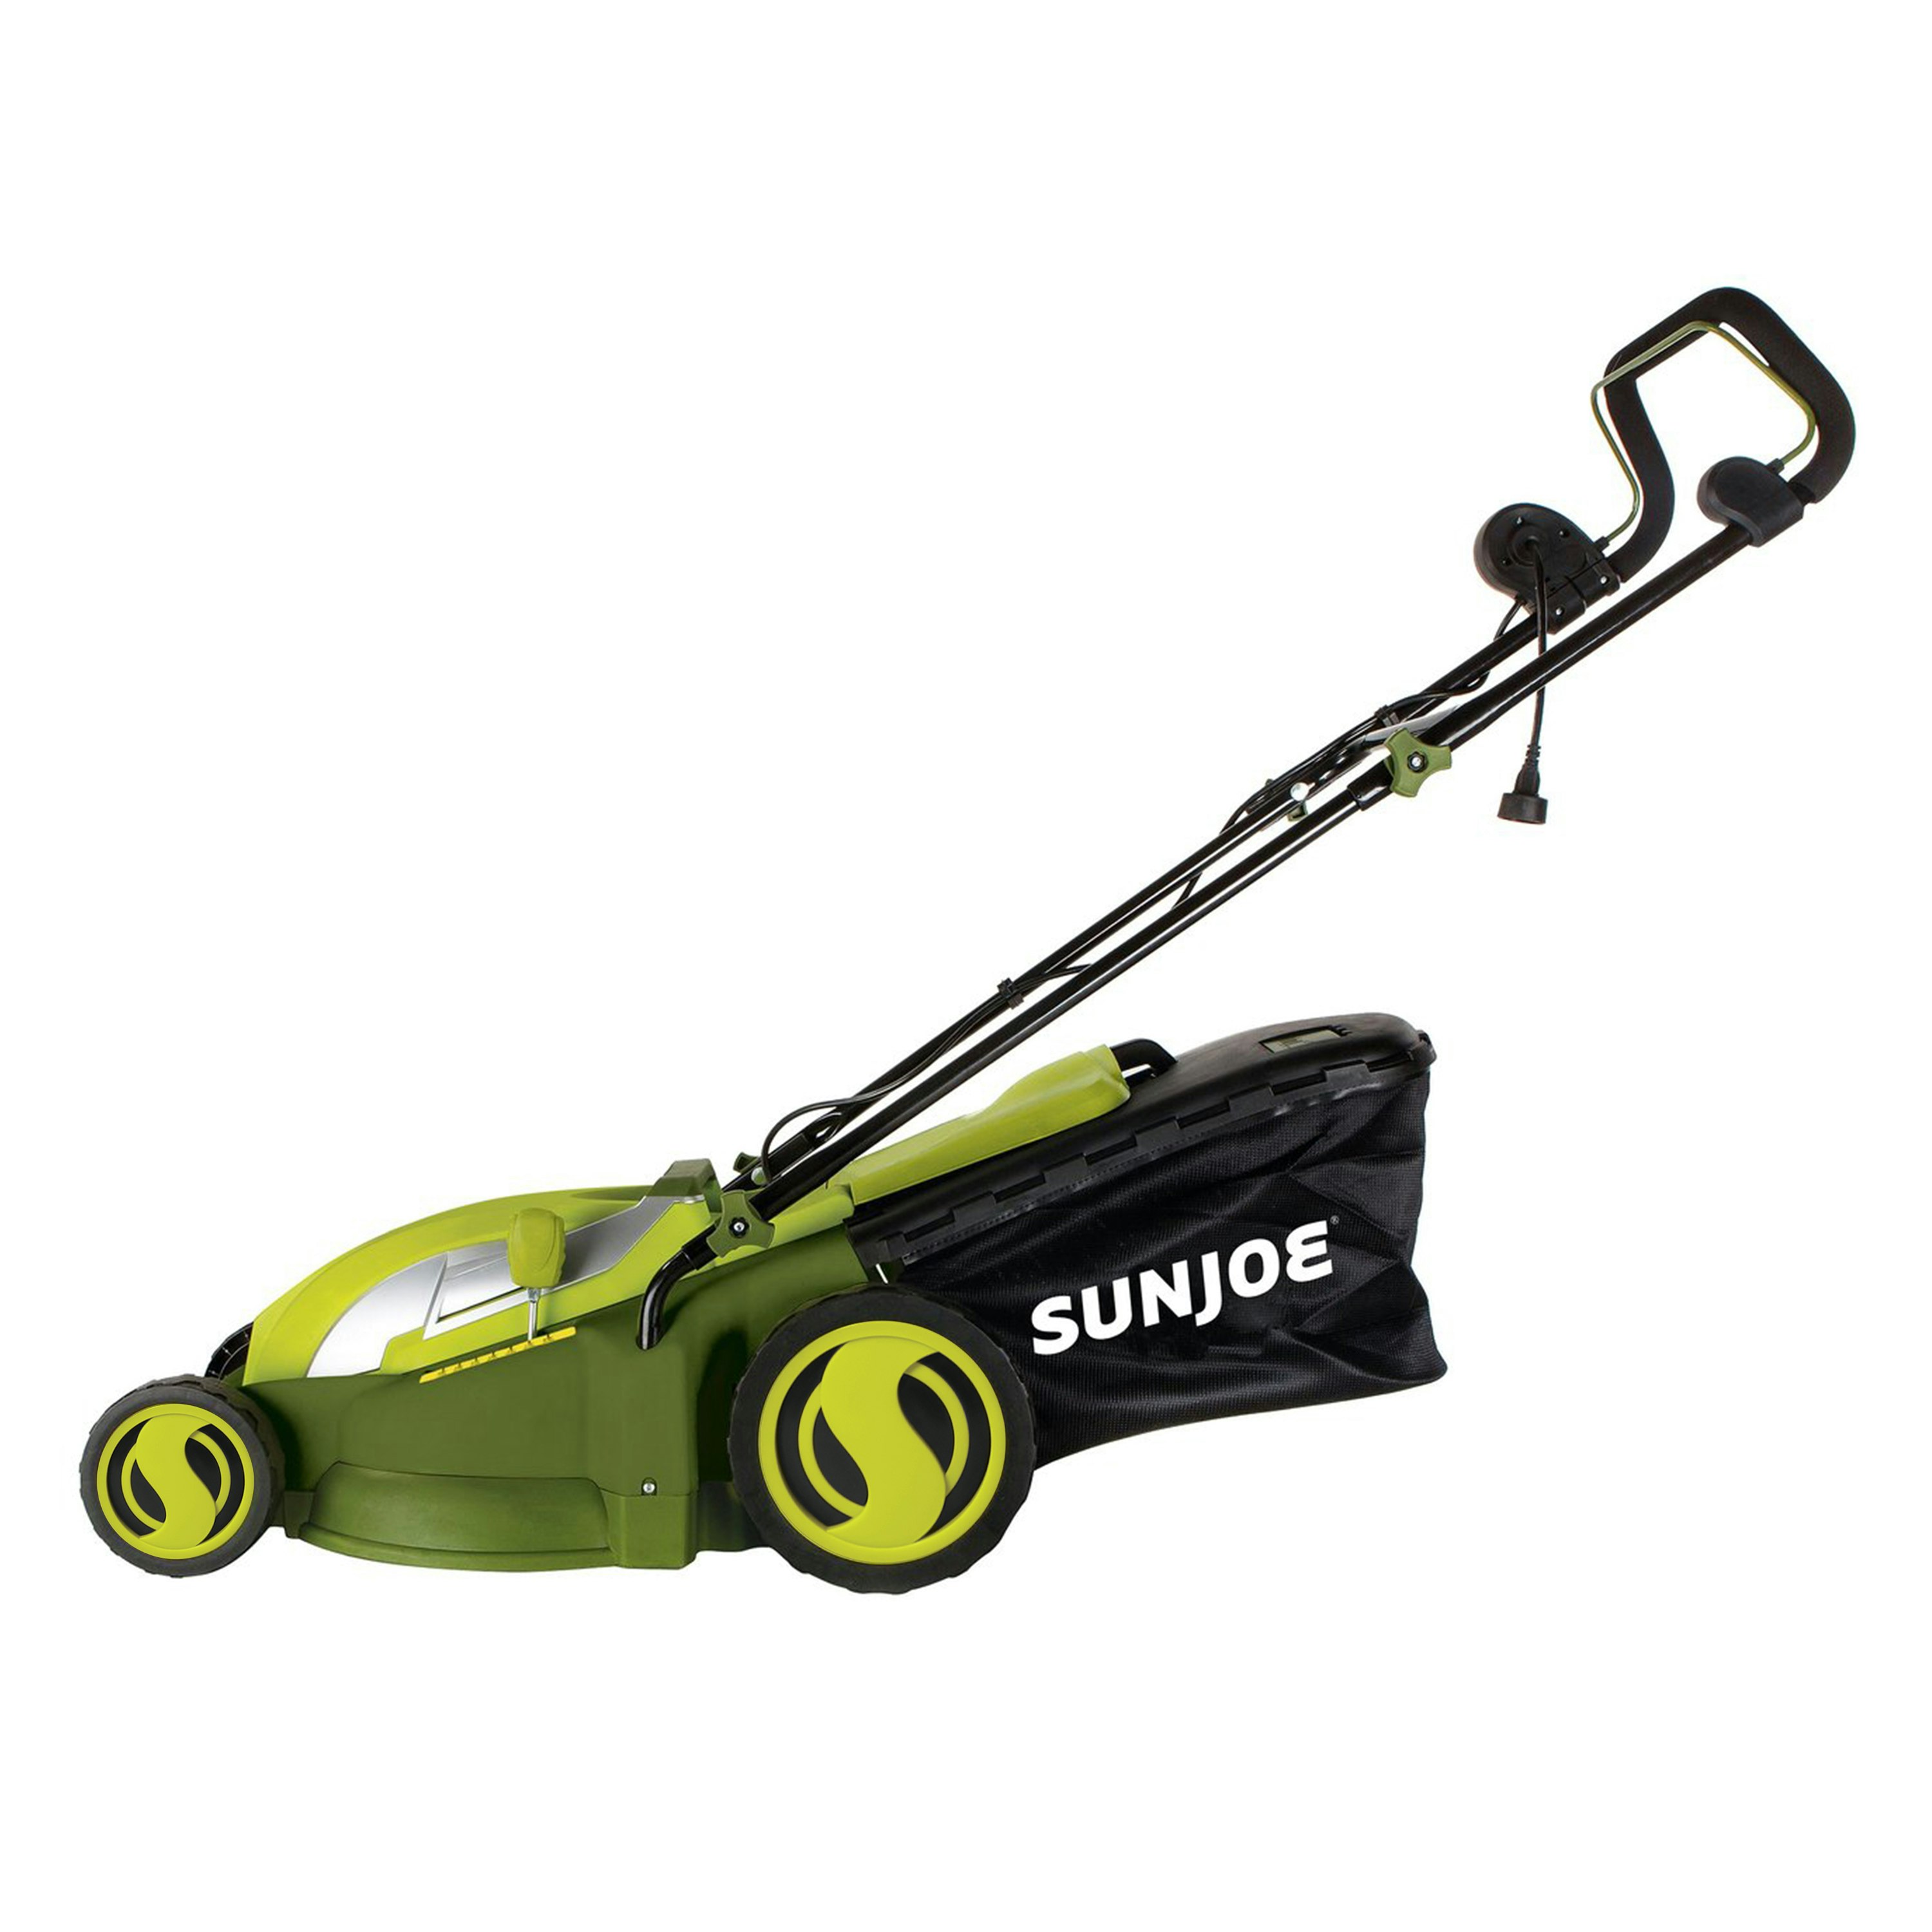 STIHL https://lawncaregarden.com/when-to-mow-new-sod/ Joined Articles